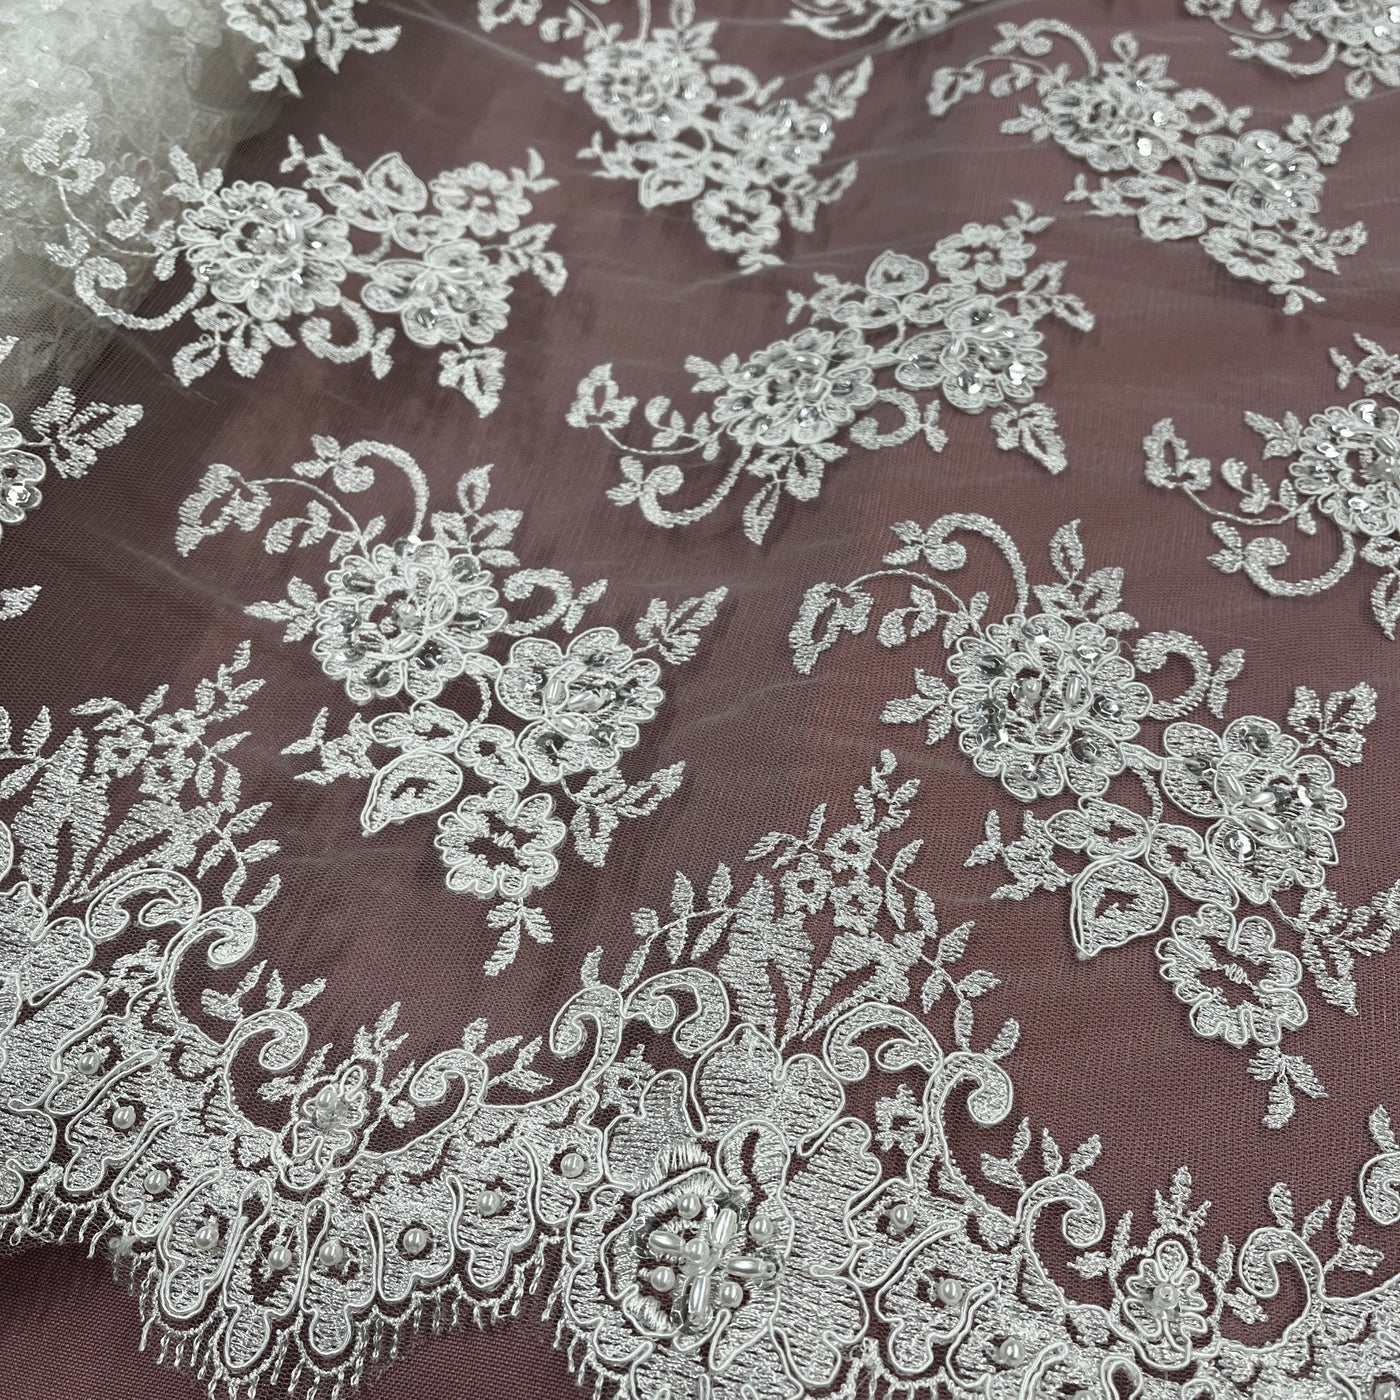 Beaded Lace Fabric Embroidered on 100% Polyester Net Mesh | Lace USA - 96682W-BP Ivory